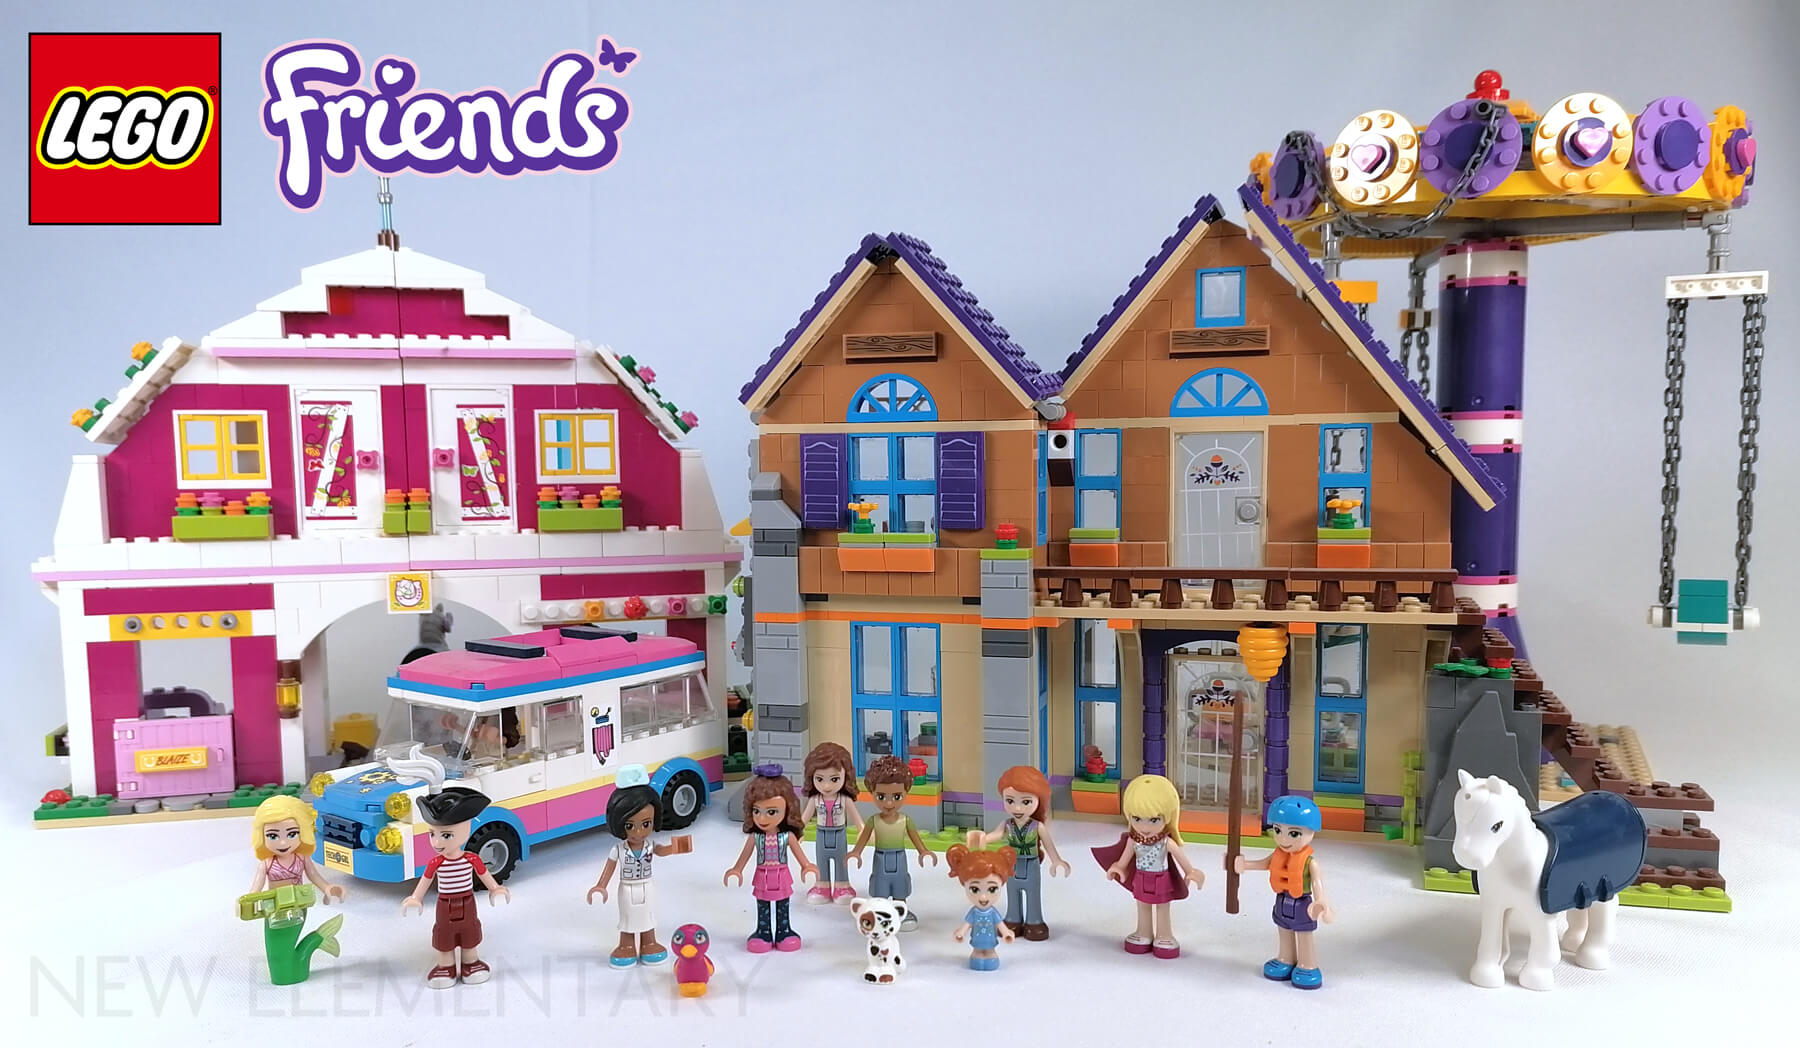 Old Elementary: 10 years of LEGO® Friends | New Elementary: LEGO